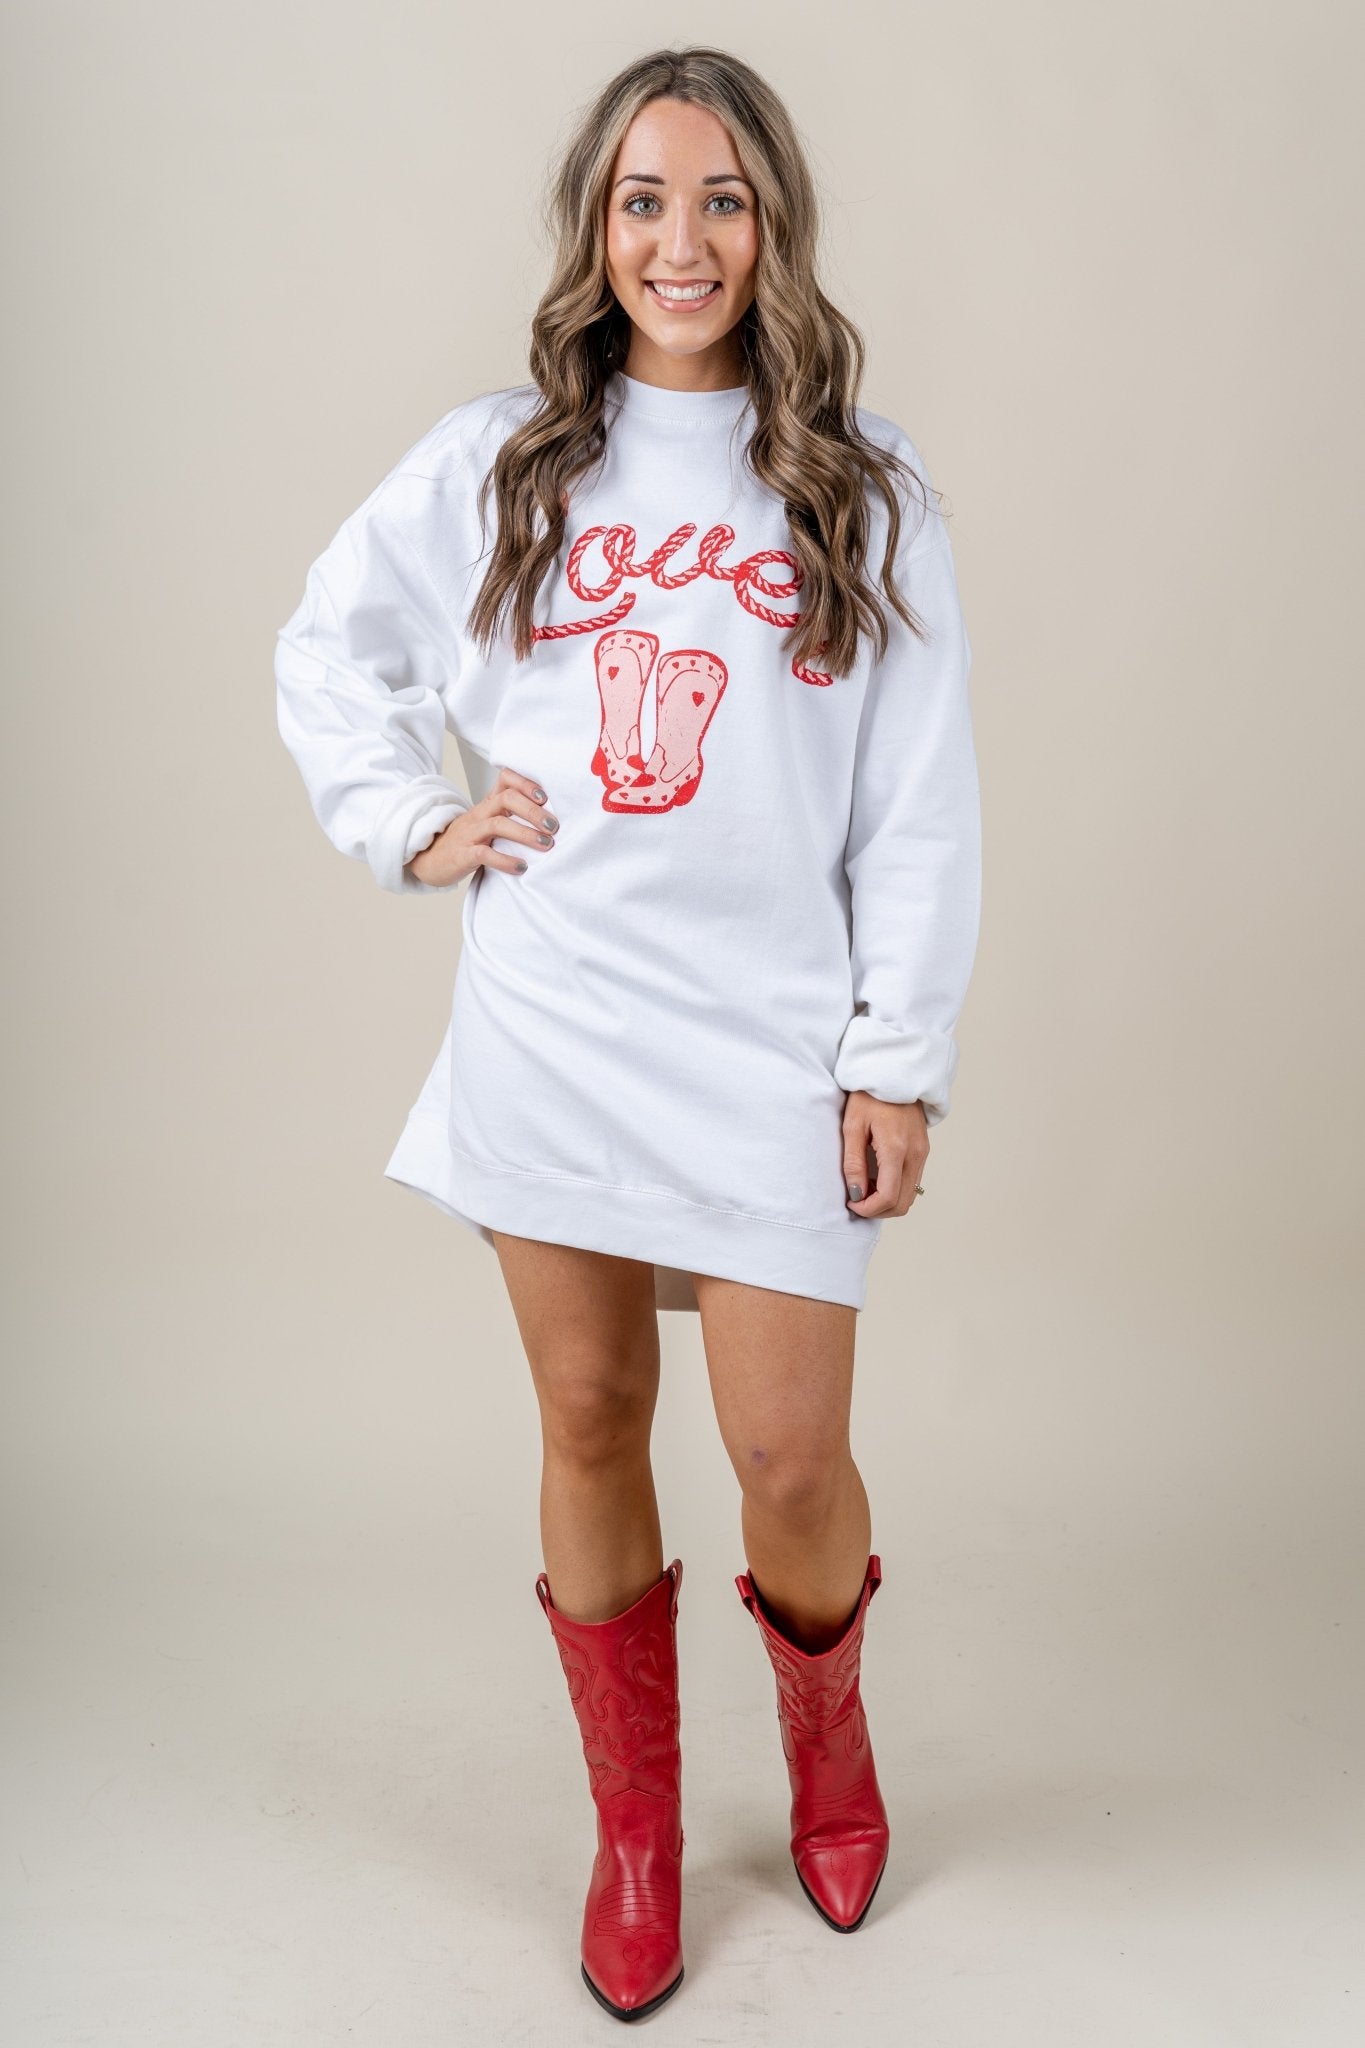 Lover boot sweatshirt dress white - Trendy Valentine's T-Shirts at Lush Fashion Lounge Boutique in Oklahoma City